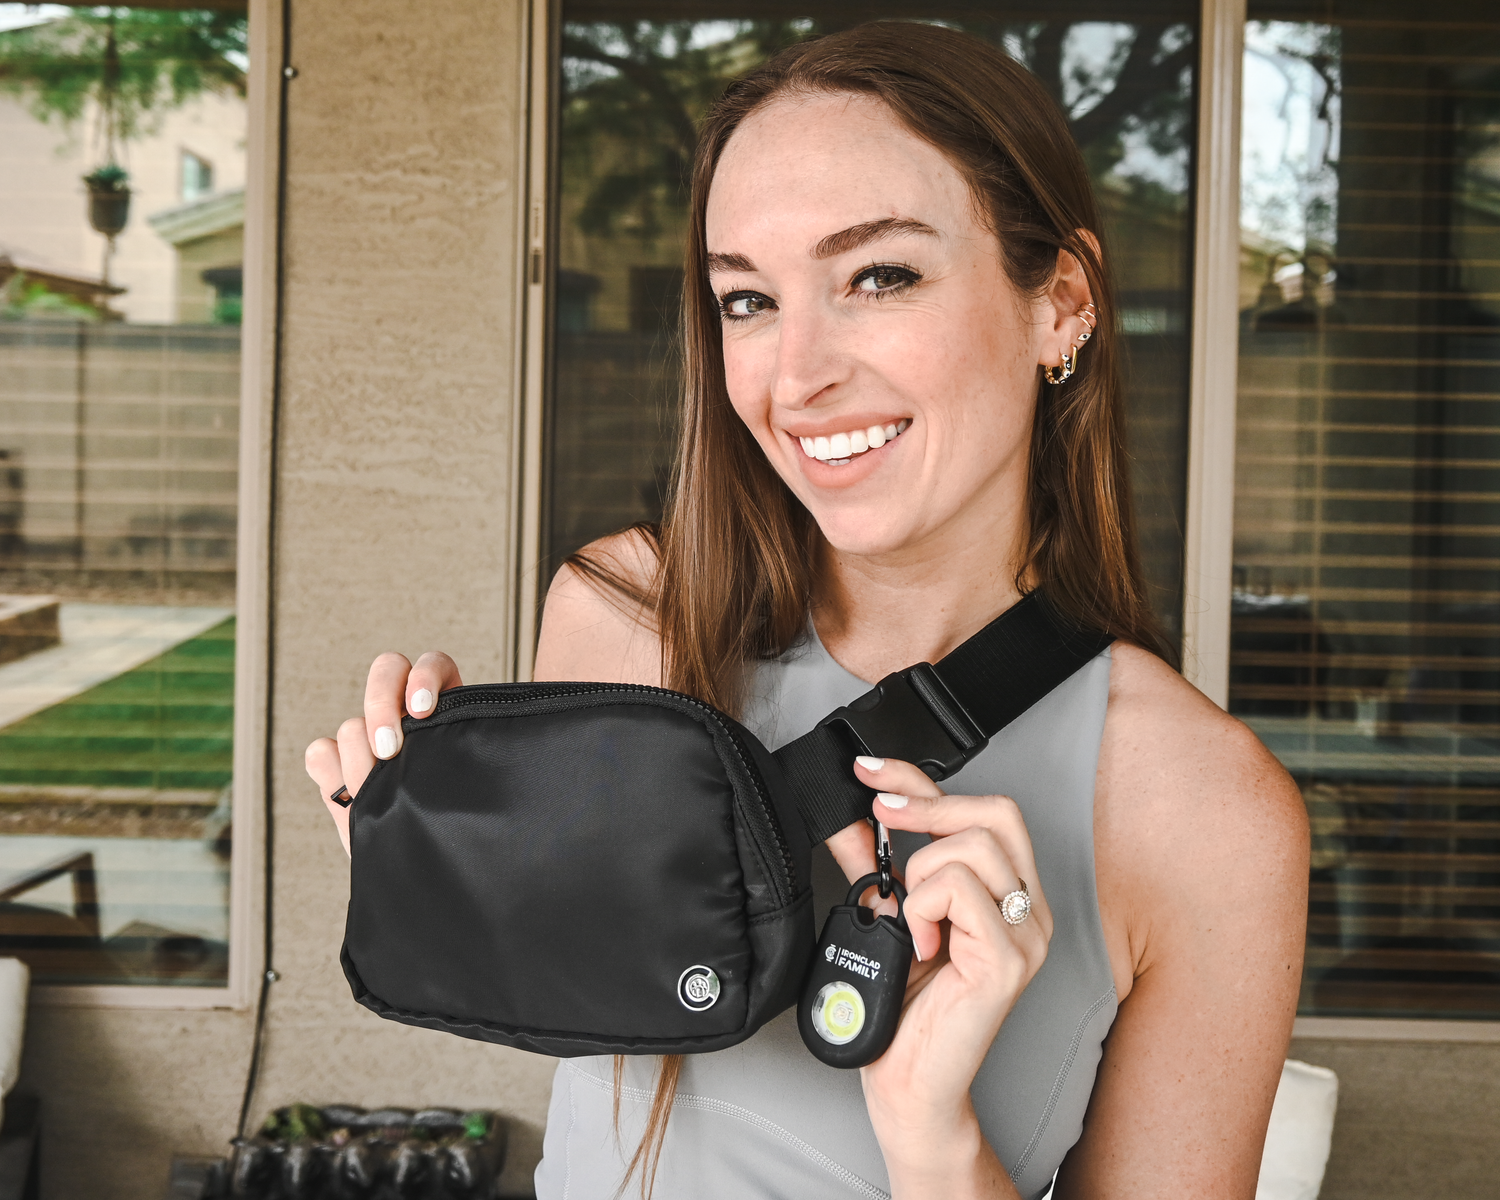 Smiling woman presenting the personal alarm fanny pack